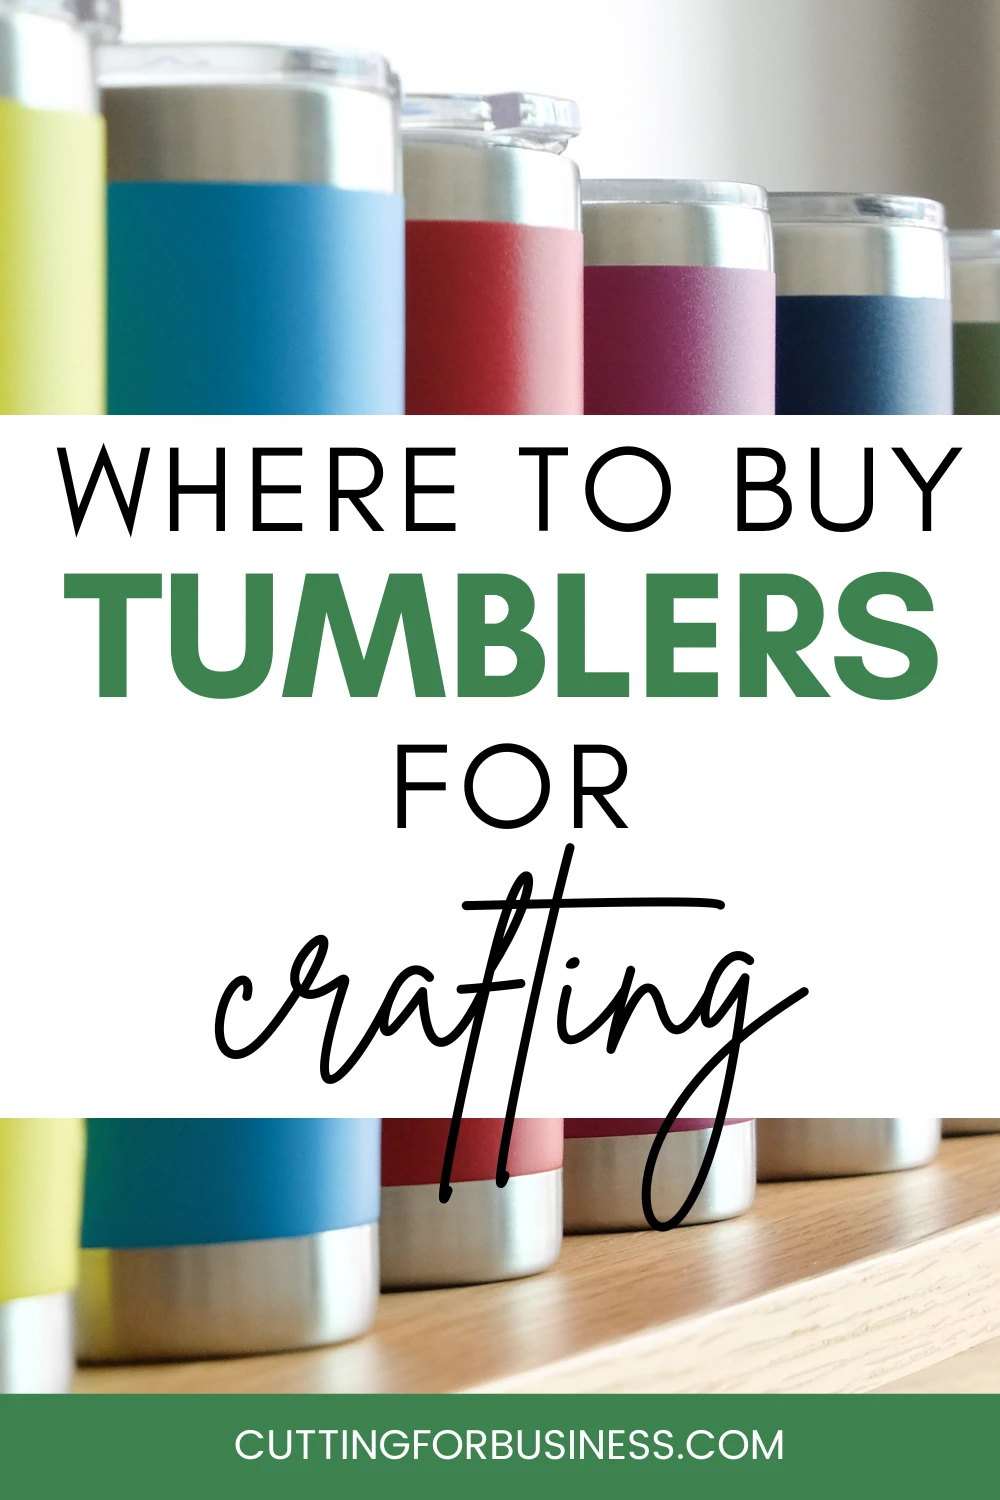 8 Places to Buy Tumblers for Crafting - Cutting for Business